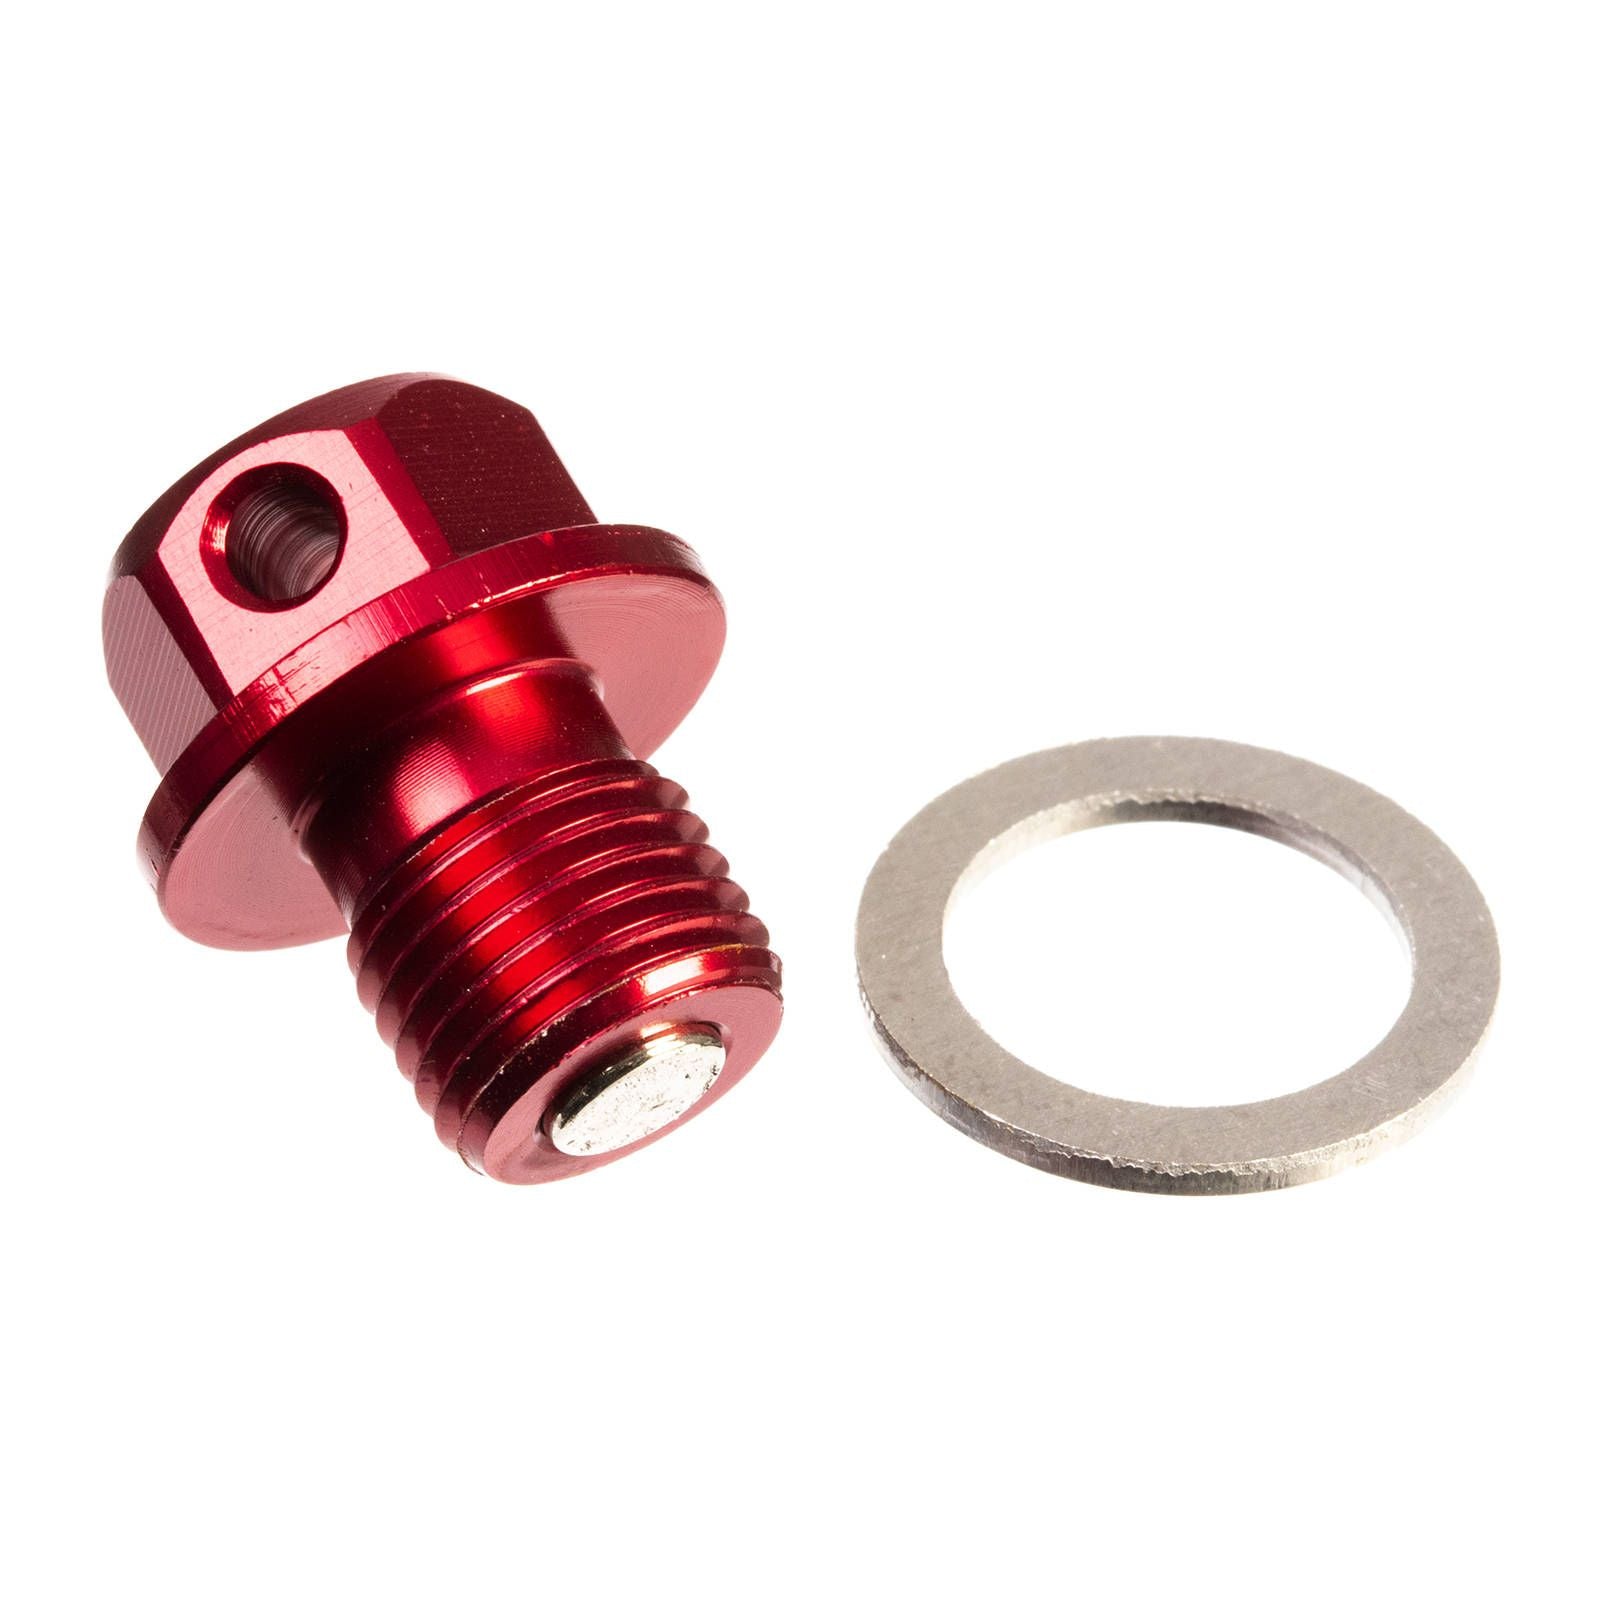 New WHITES Magnetic Sump Plug M12 x 12 x 1.25 - Red #WPMDP1212125R